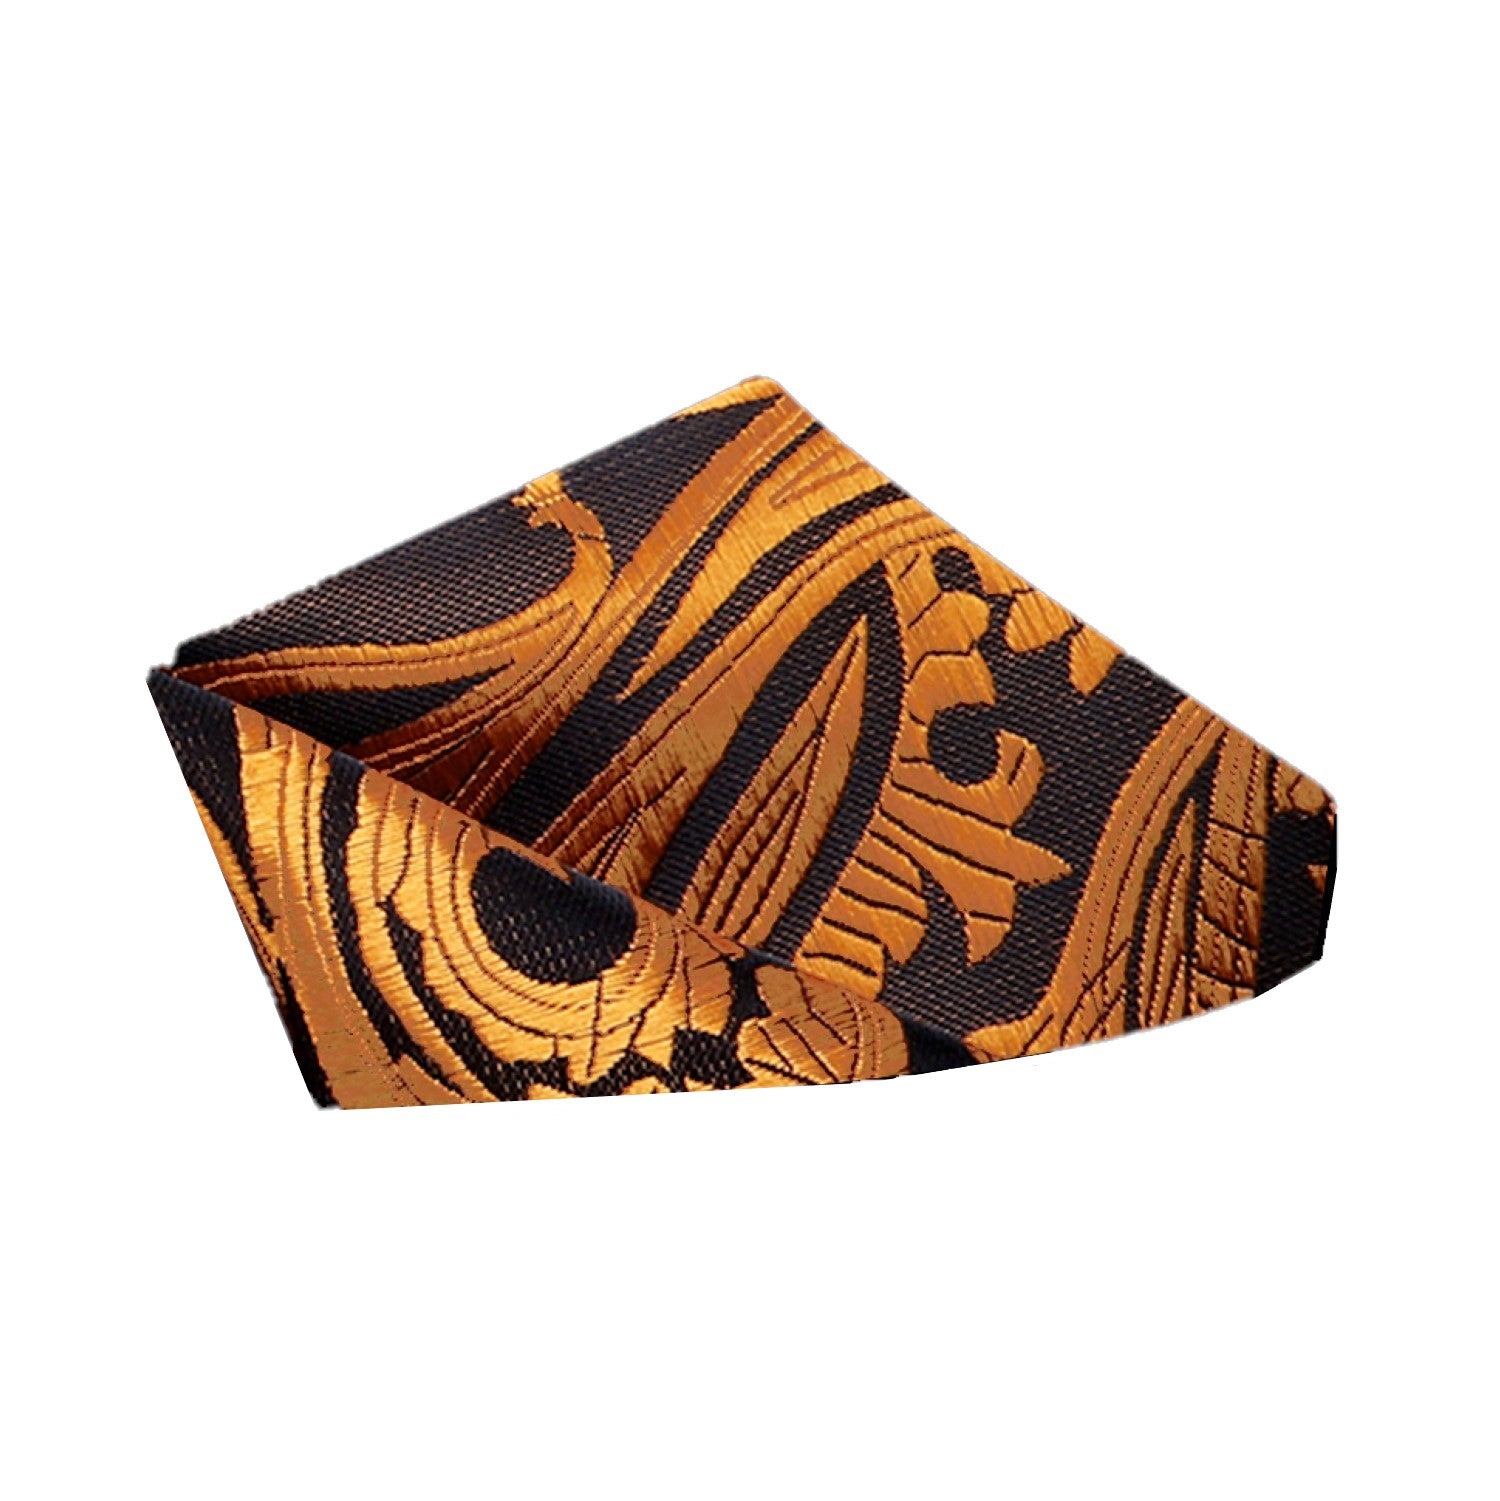 Alt View: Gold and Brown Paisley Pocket Square